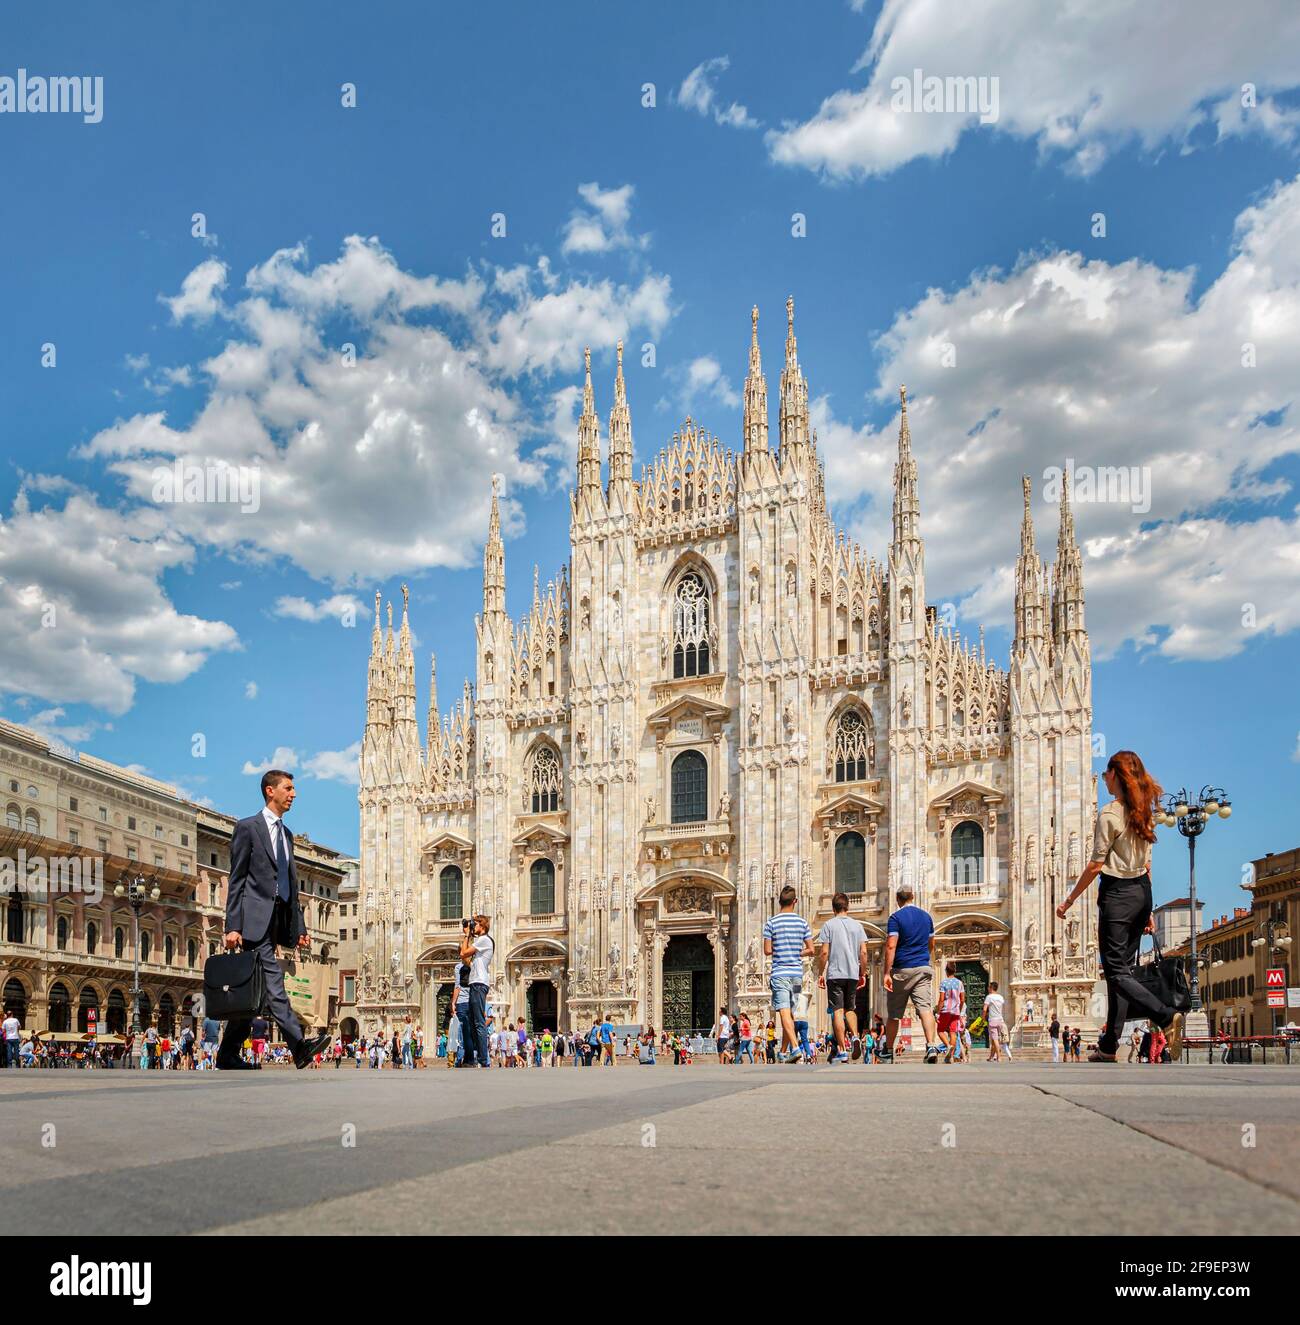 Milan, Milan Province, Lombardy, Italy.  The Duomo, or cathedral, in the Piazza del Duomo. Stock Photo